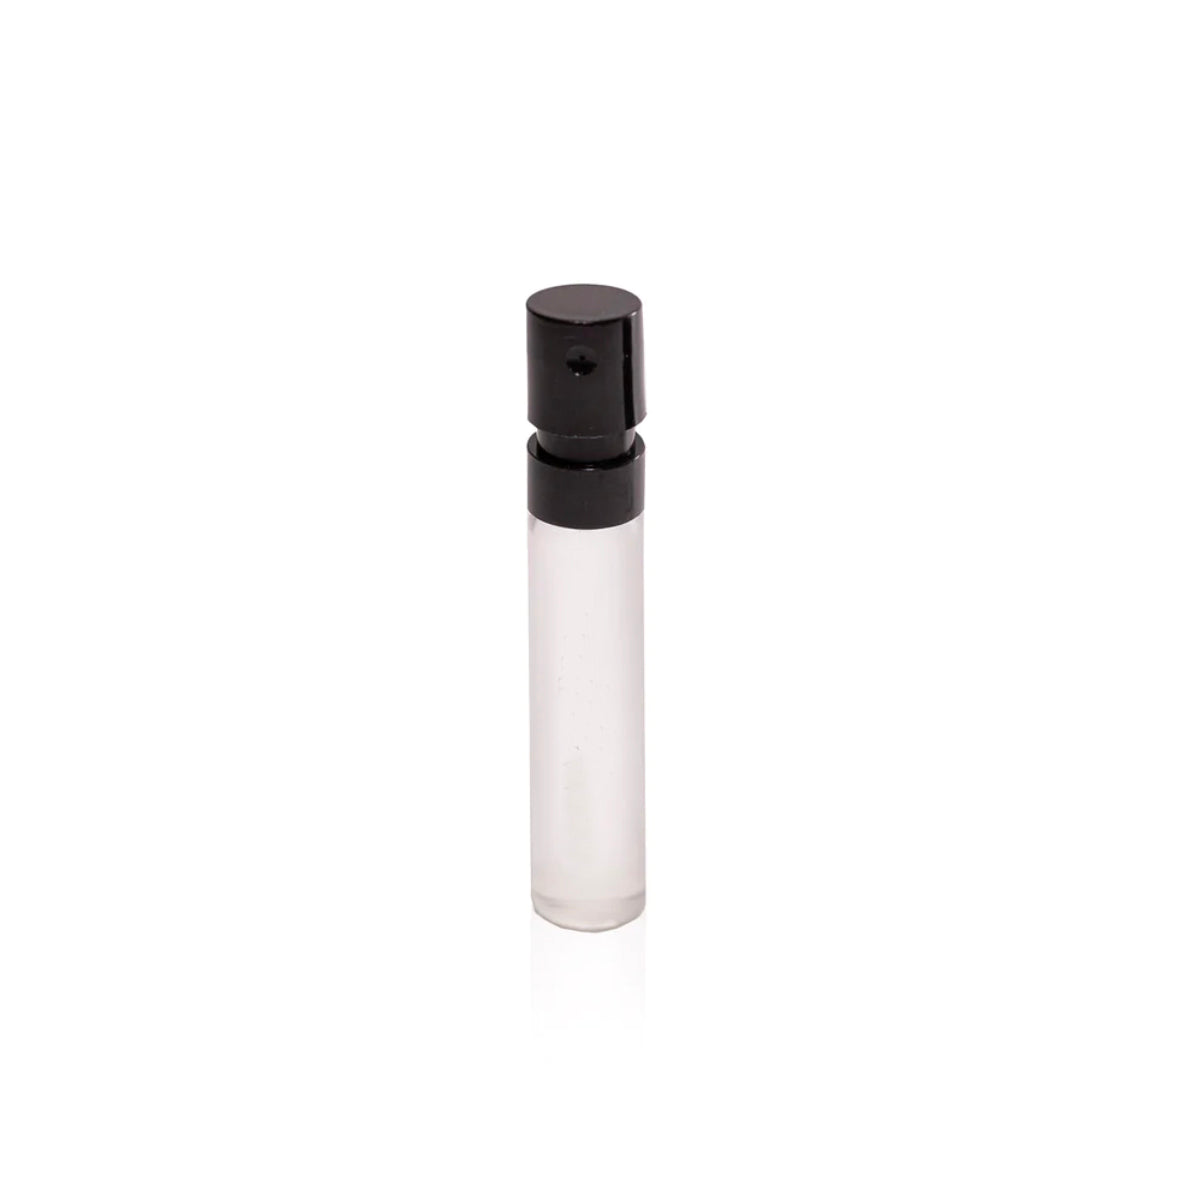 The Architects Club by Arquiste, 2ml Sample Vial